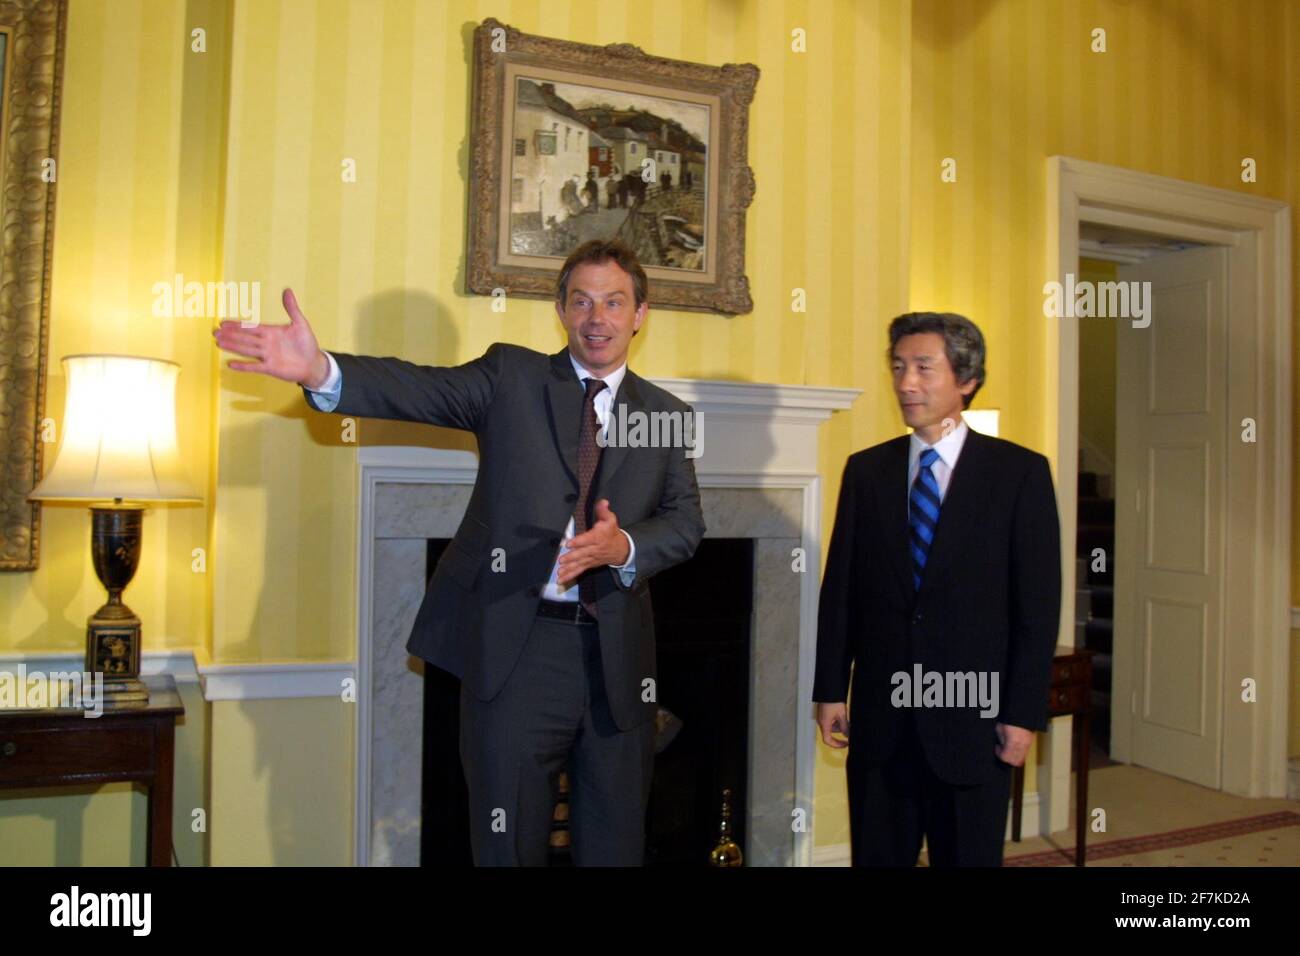 Britain's Prime Minister Tony Blair (L) greets Japanese Prime Minister Junichiro Koizumi (R) inside No. 10 Downing Street in London 02 July 2001. Prime Ministers Blair and Koizumi, meeting for the first time, are discussing economic matters including The Kyoto Agreement. PHOTO: David SANDISON / NPA POOL Stock Photo